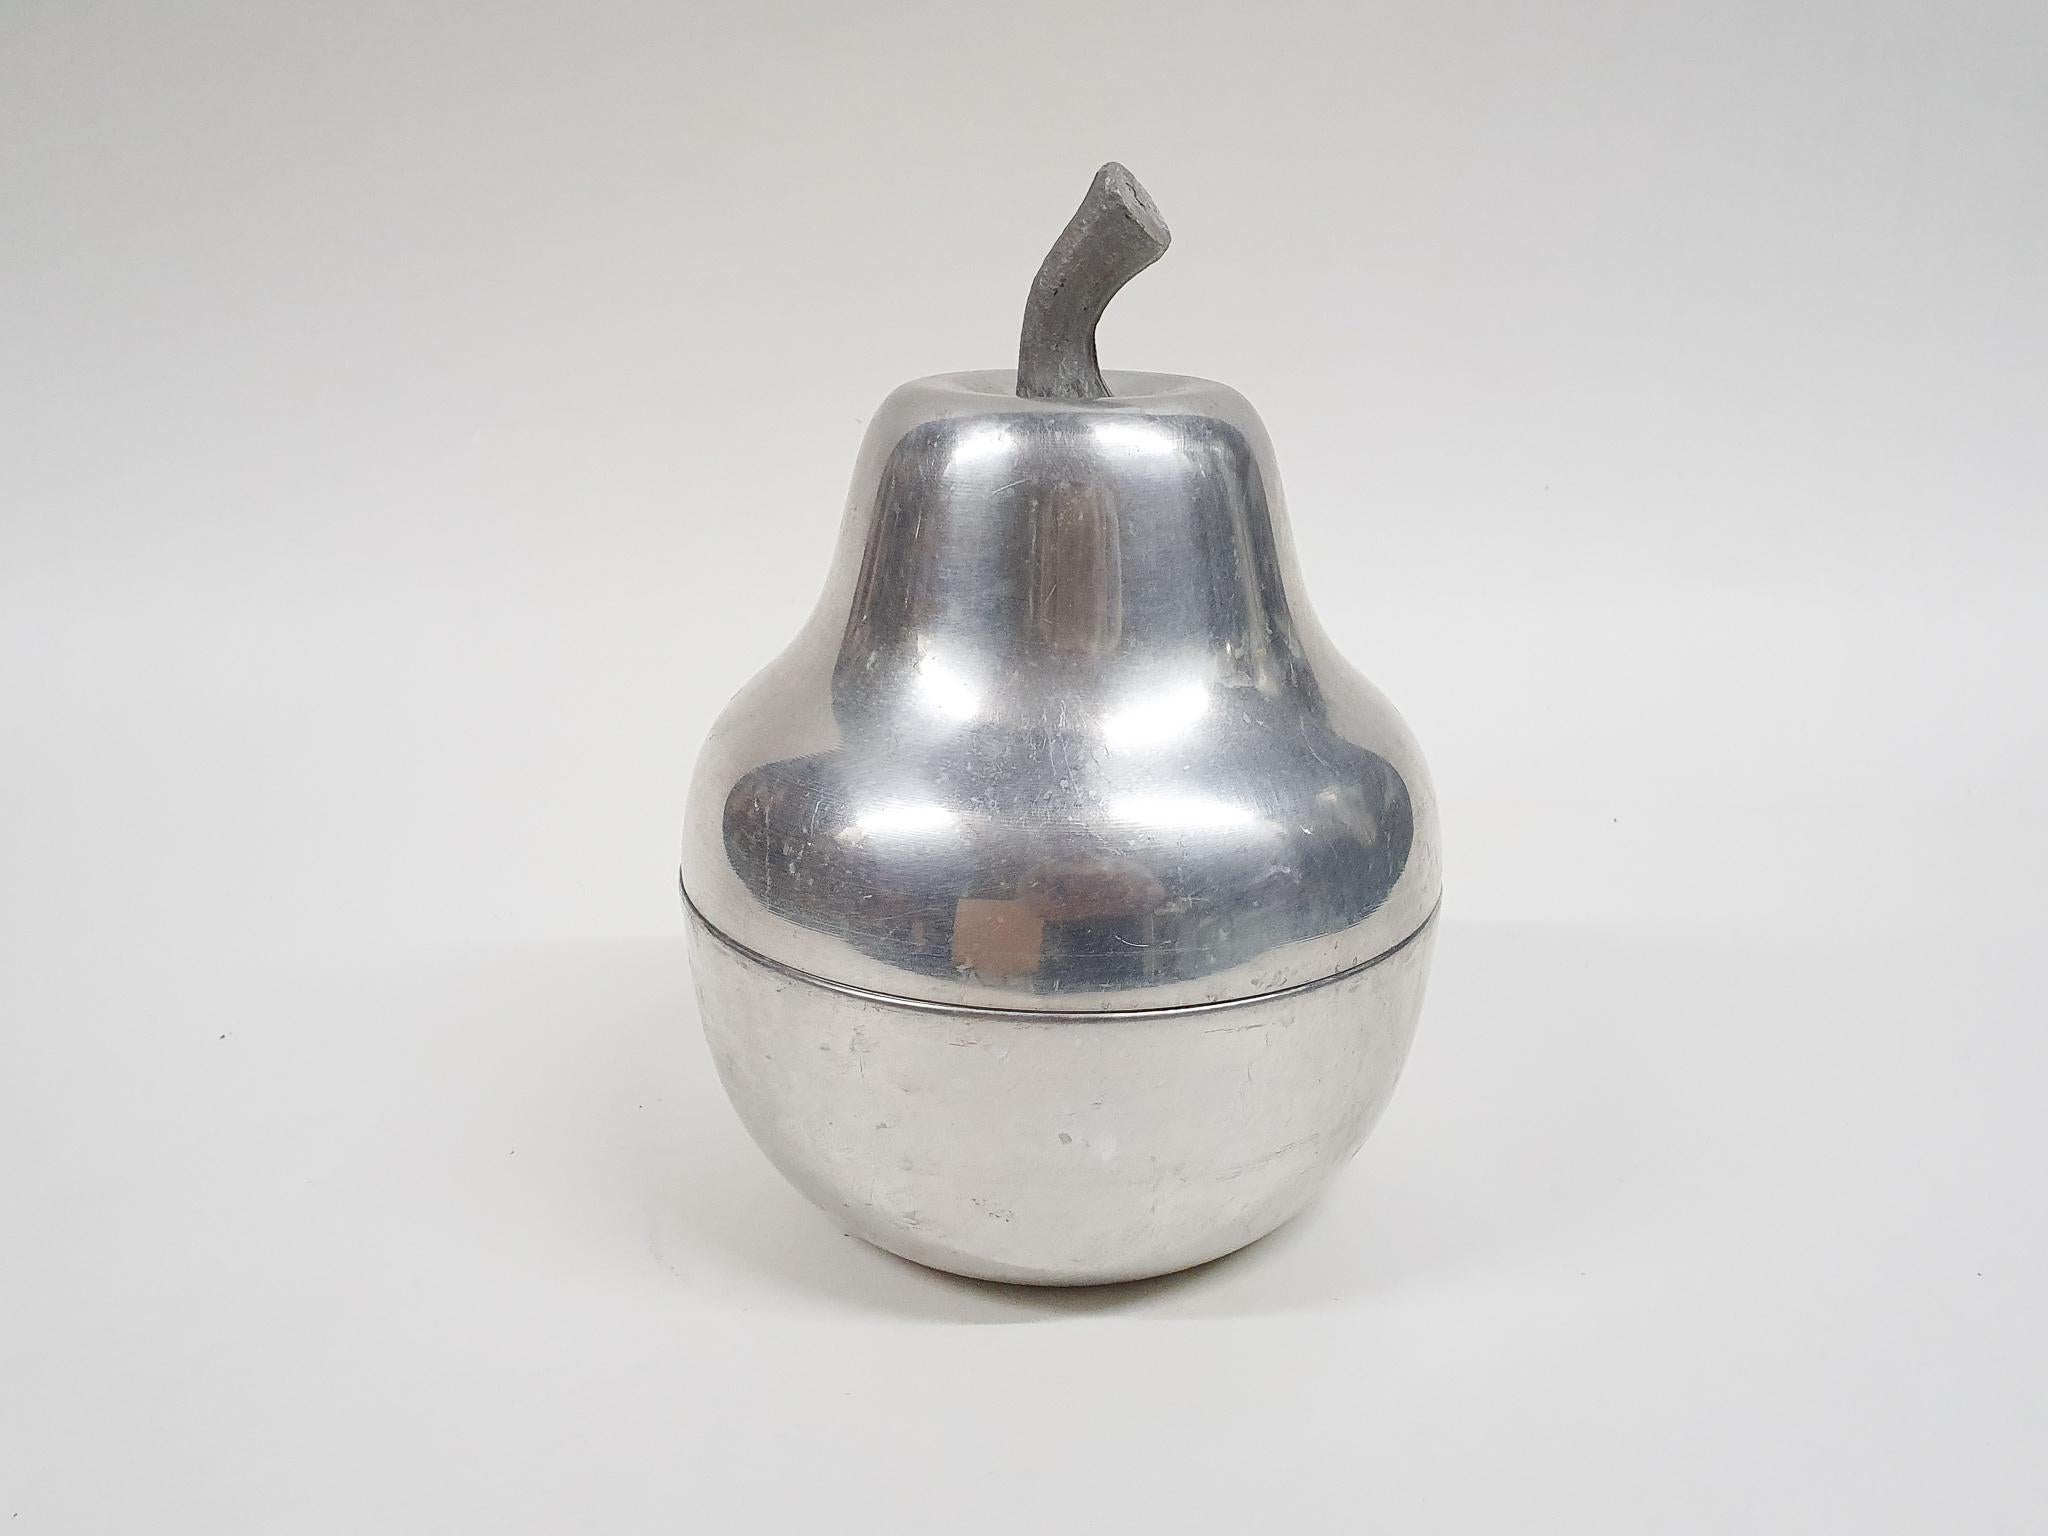 Vintage ice bucket in the shape of a pear with plastic interior.